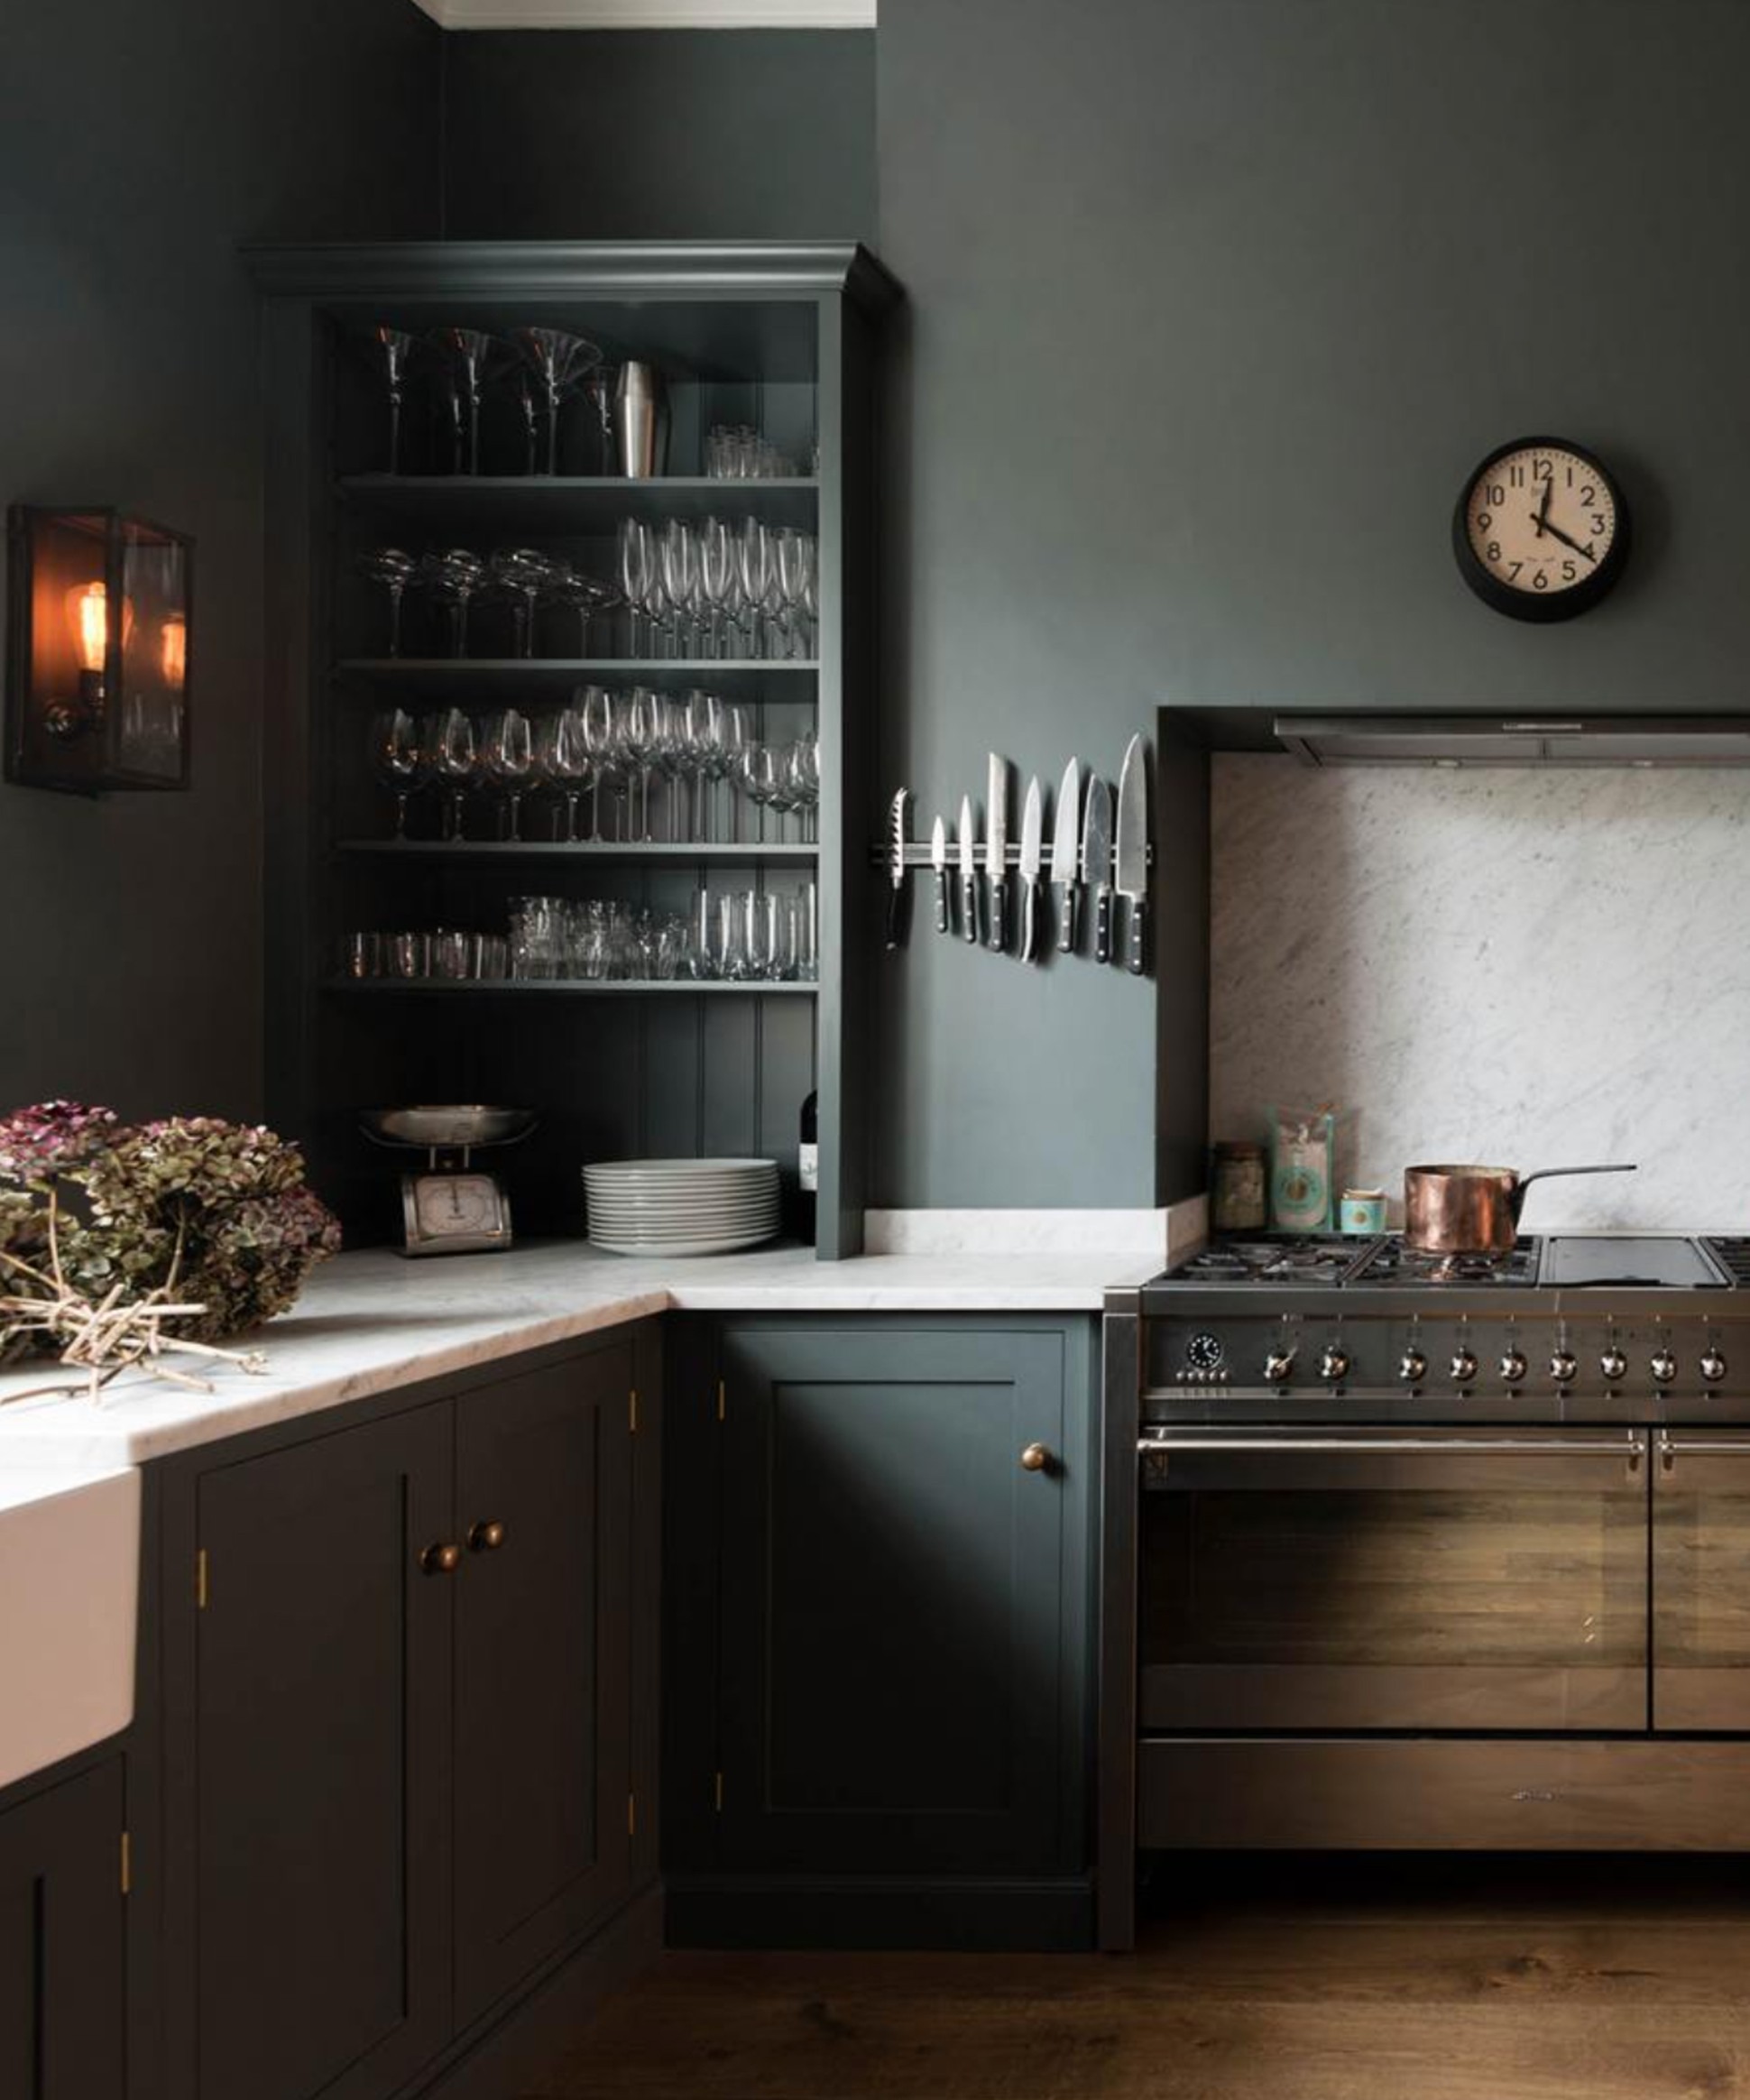 Grey kitchen ideas - designers explain how to use this color  - dark grey kitchen